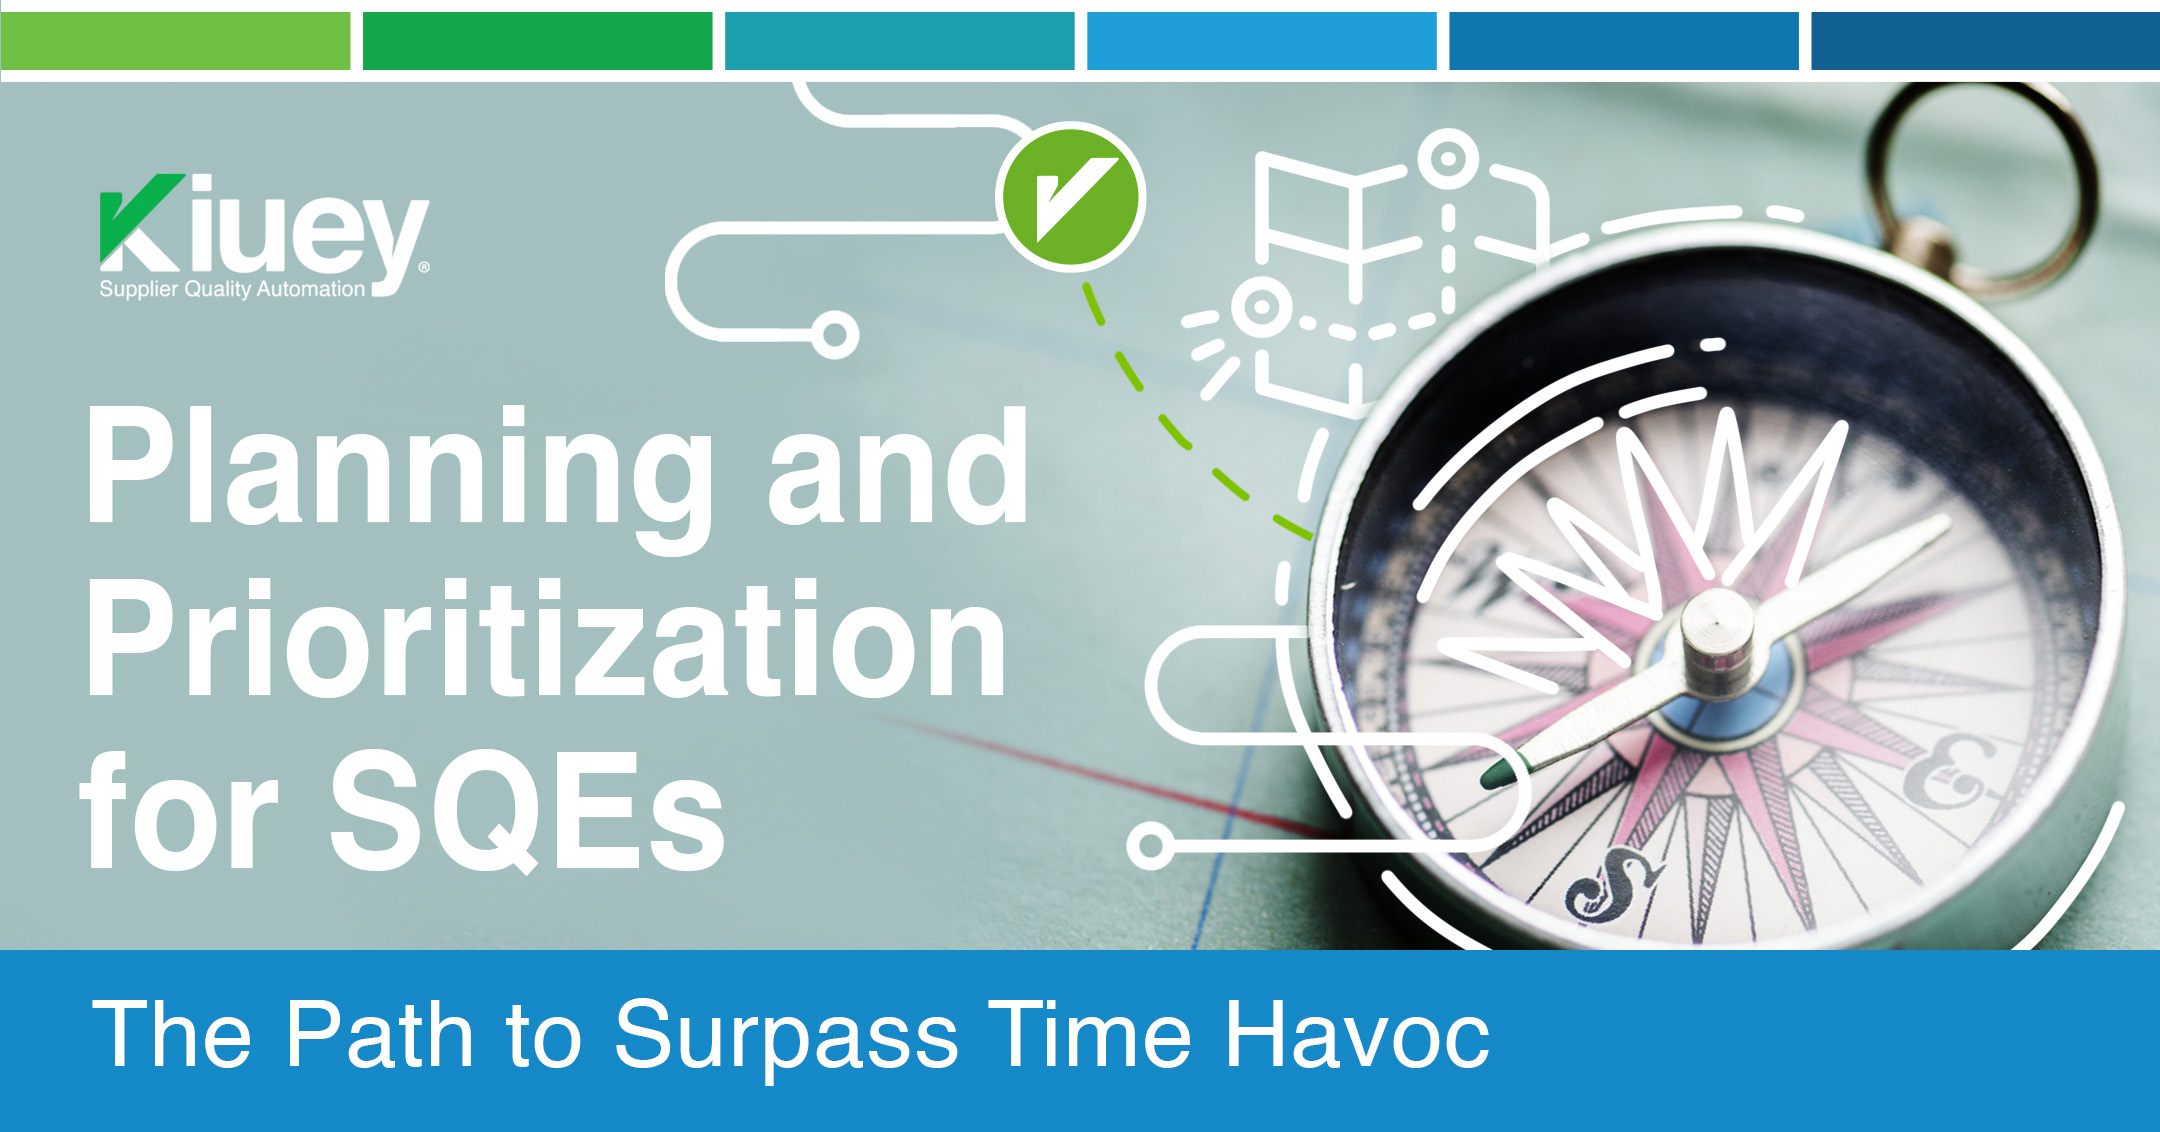 Planning and Prioritization over Time Management: The Path to Surpass SQEs’ Time Havoc